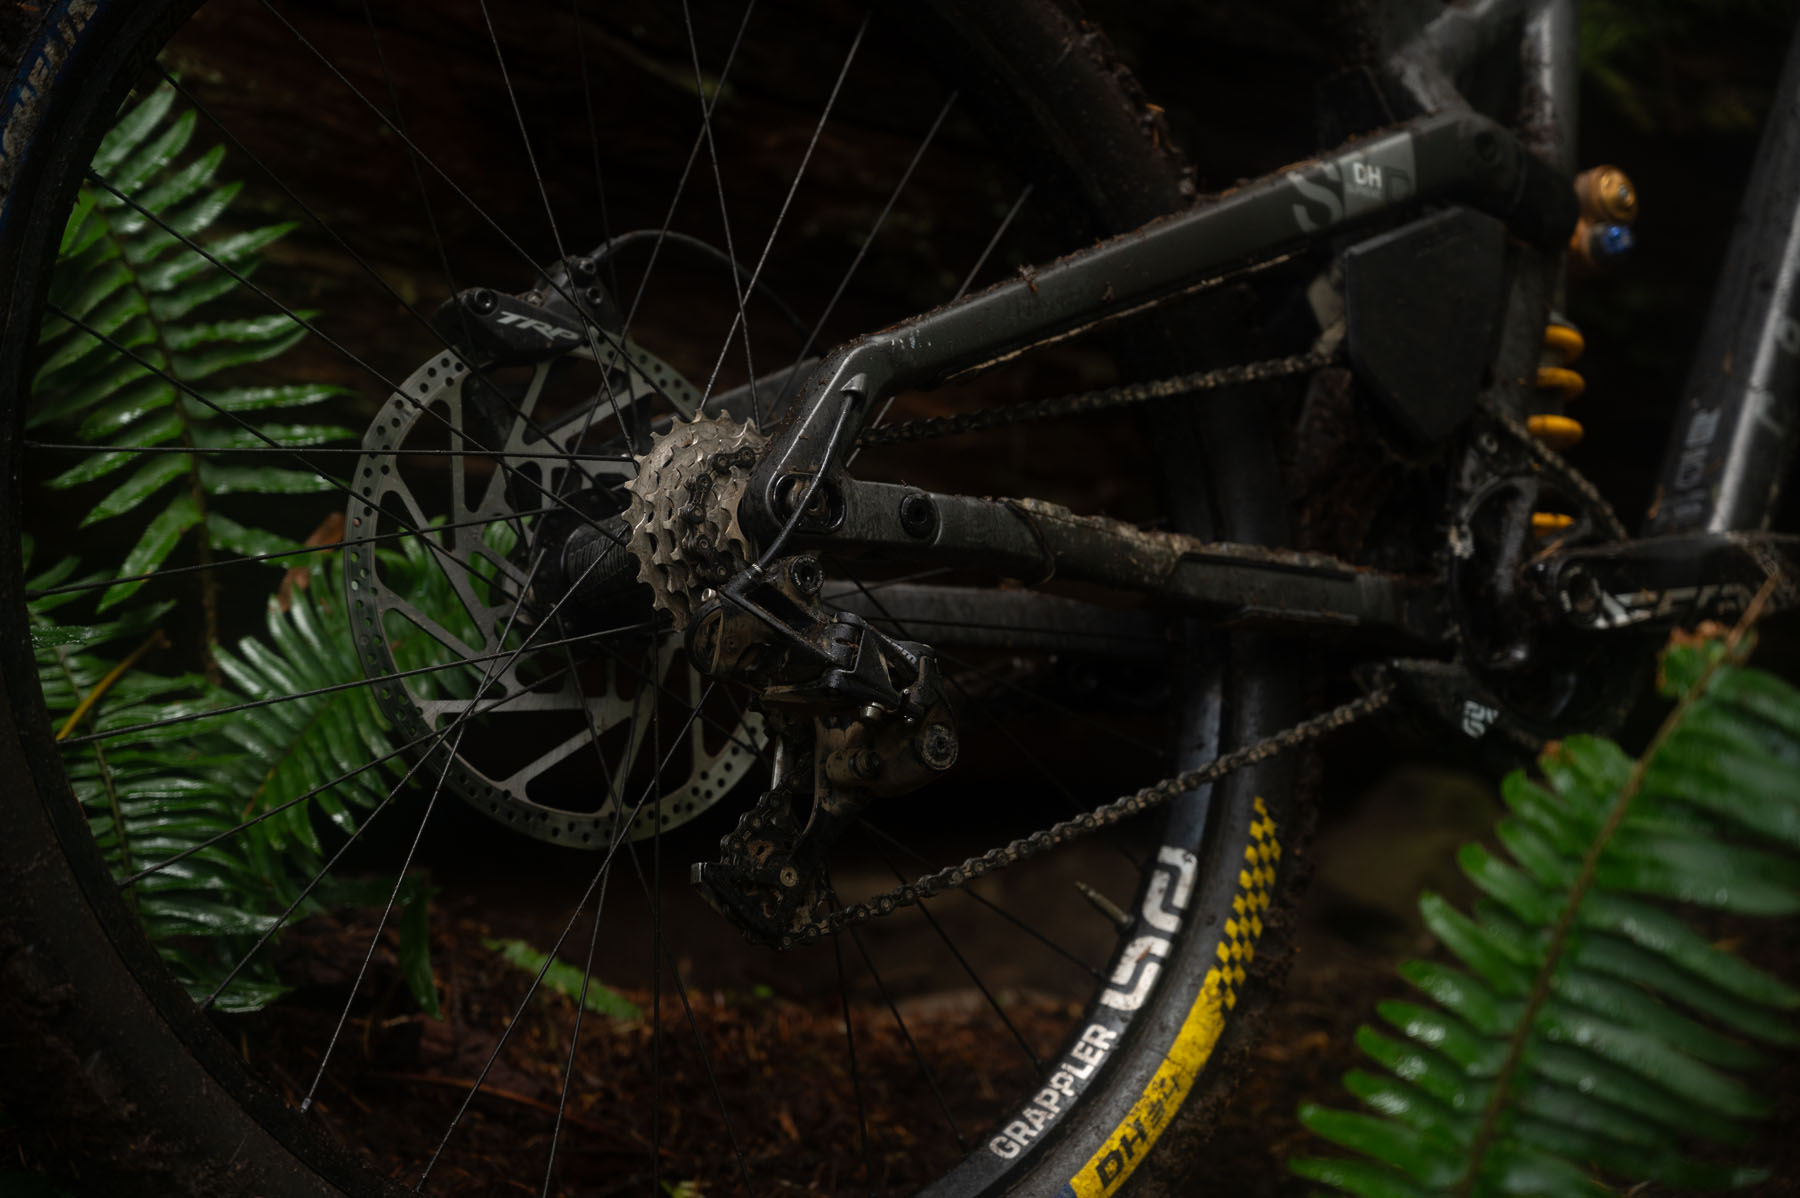 David Golay and Zack Henderson review the Commencal Supreme V5 for Blister